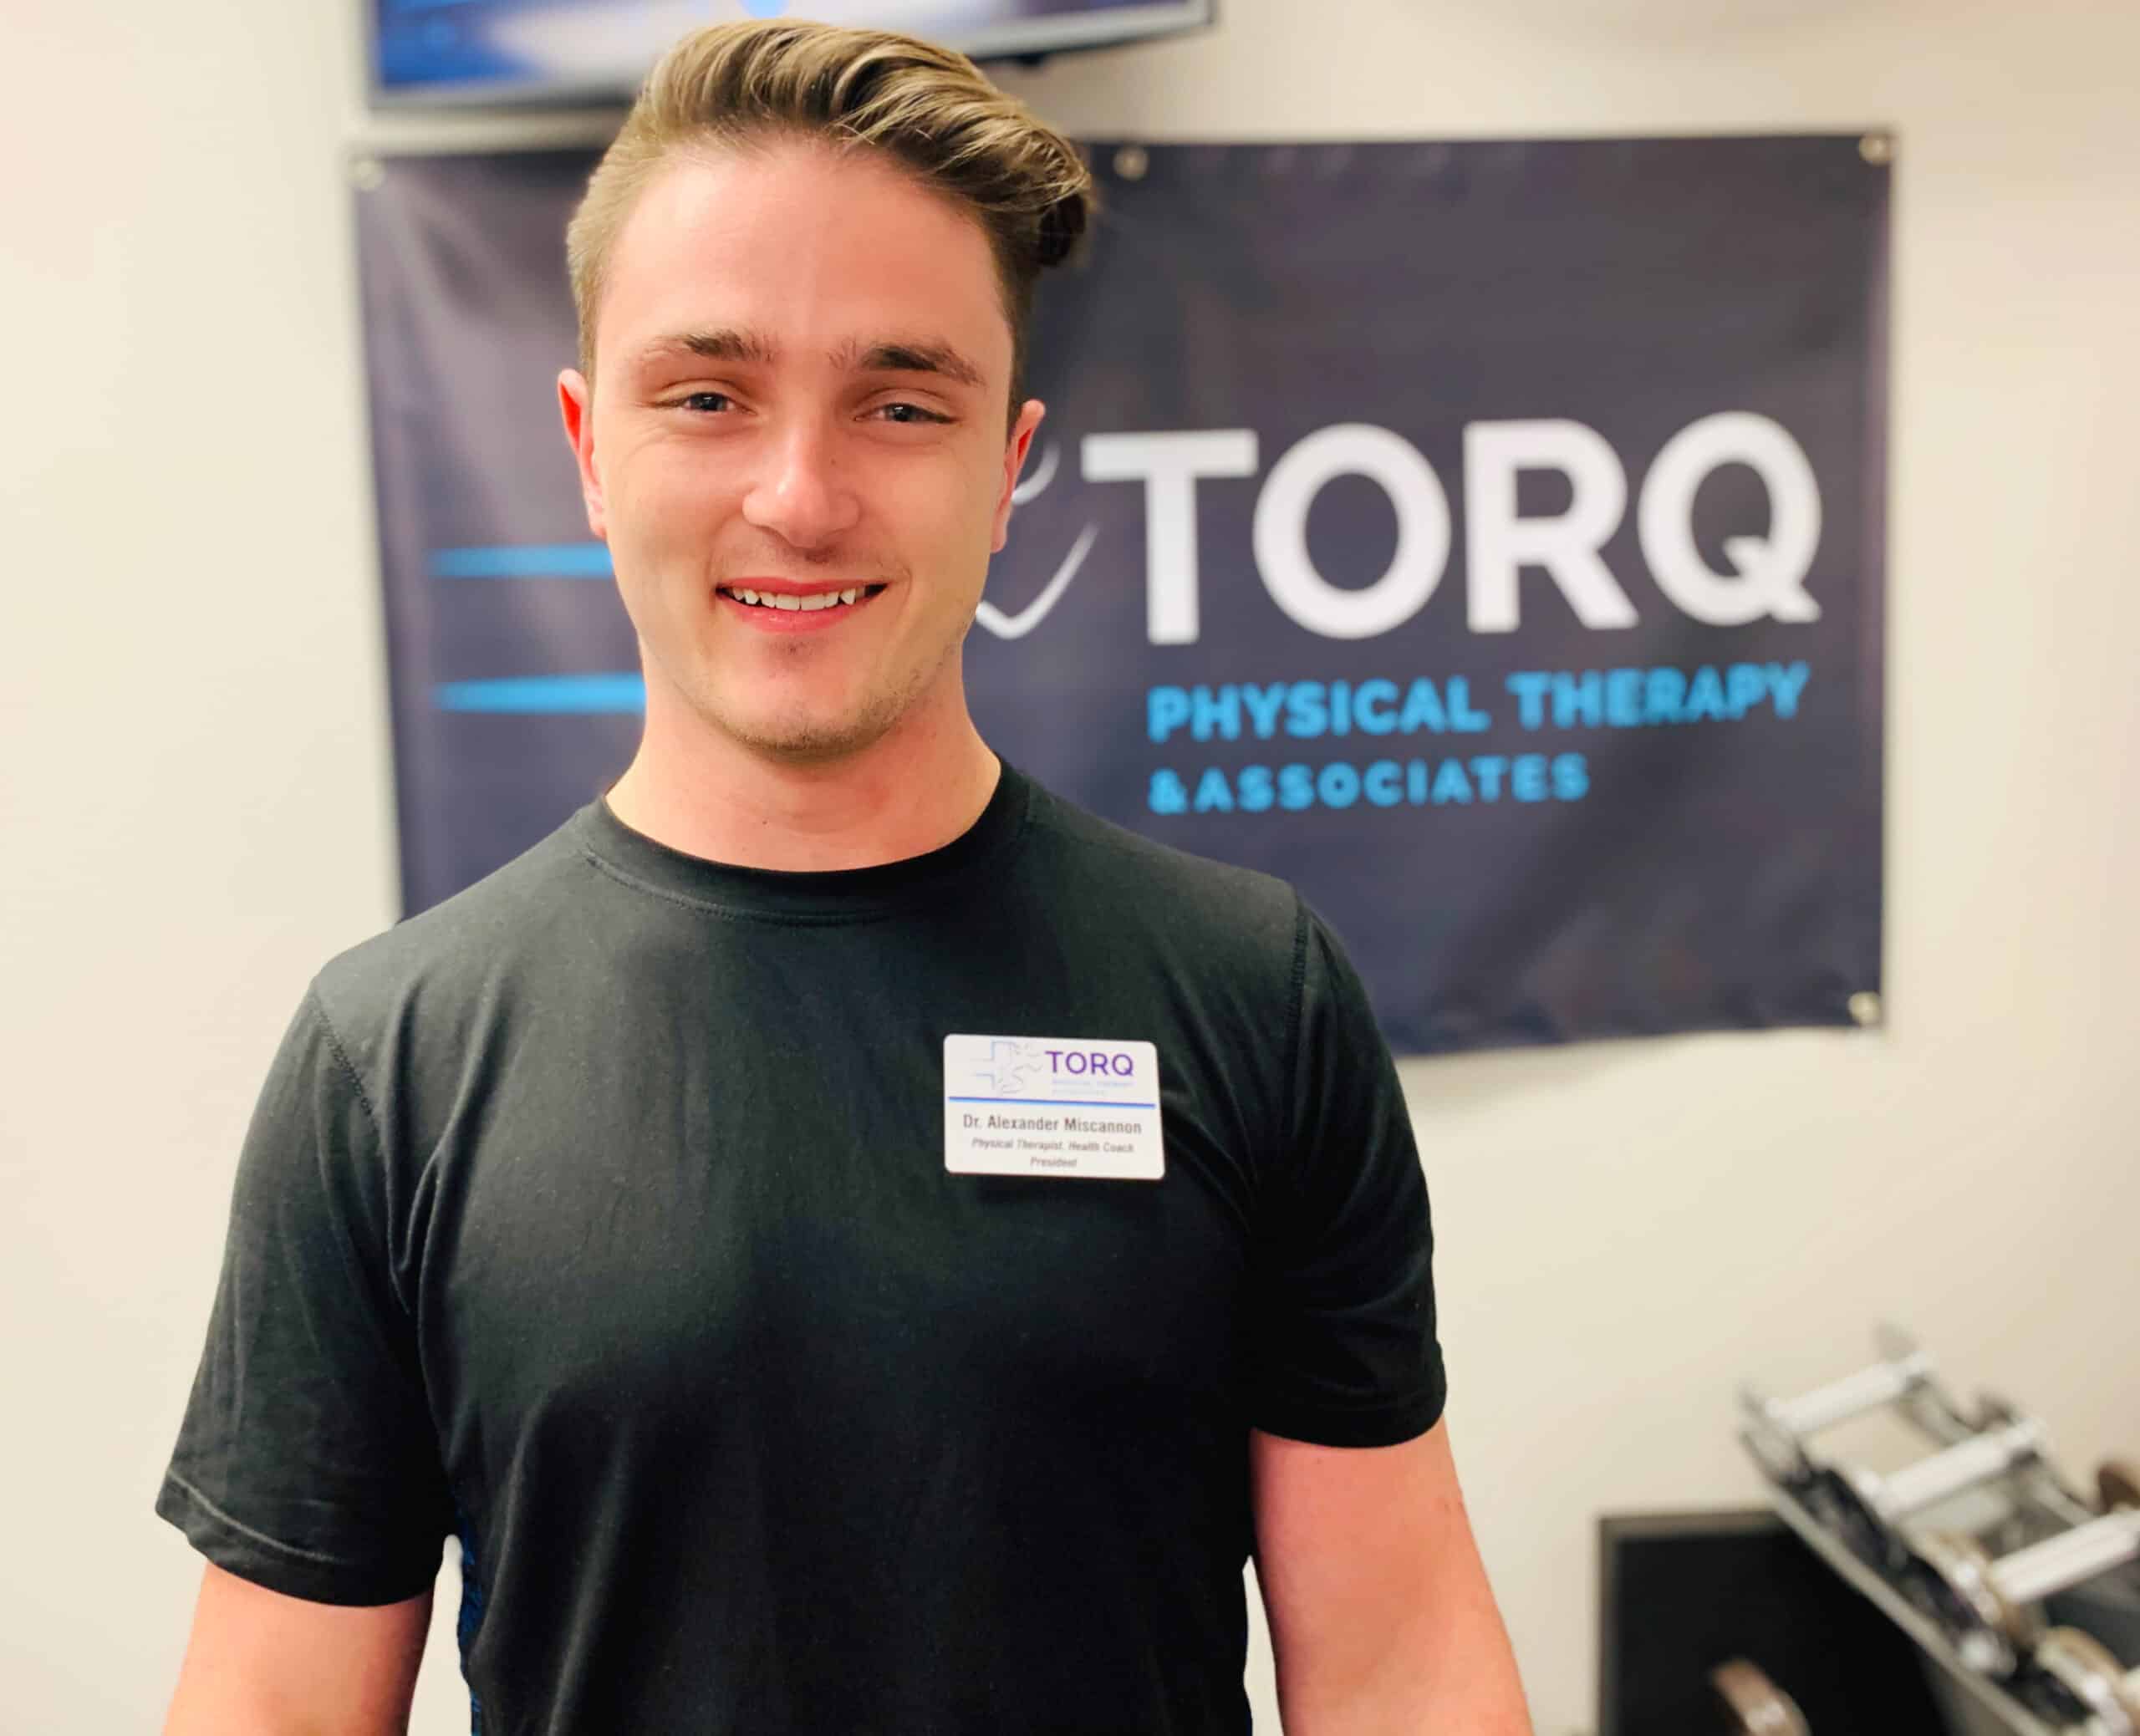 alex headshot about torq physical therapy recovery